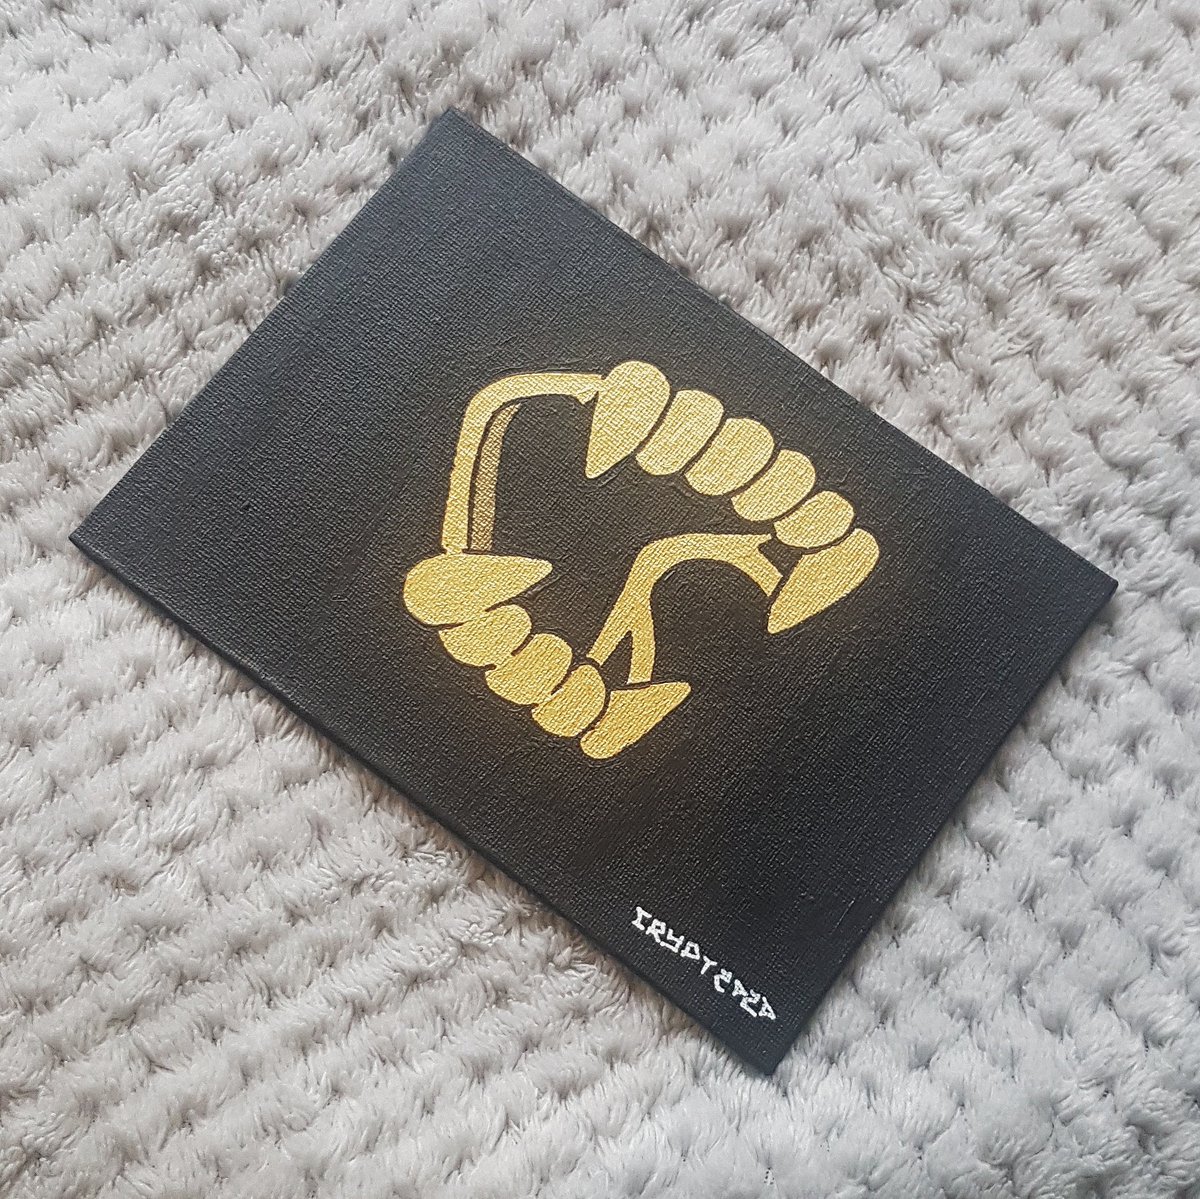 gold fang canvas boards (5x7)£20 each